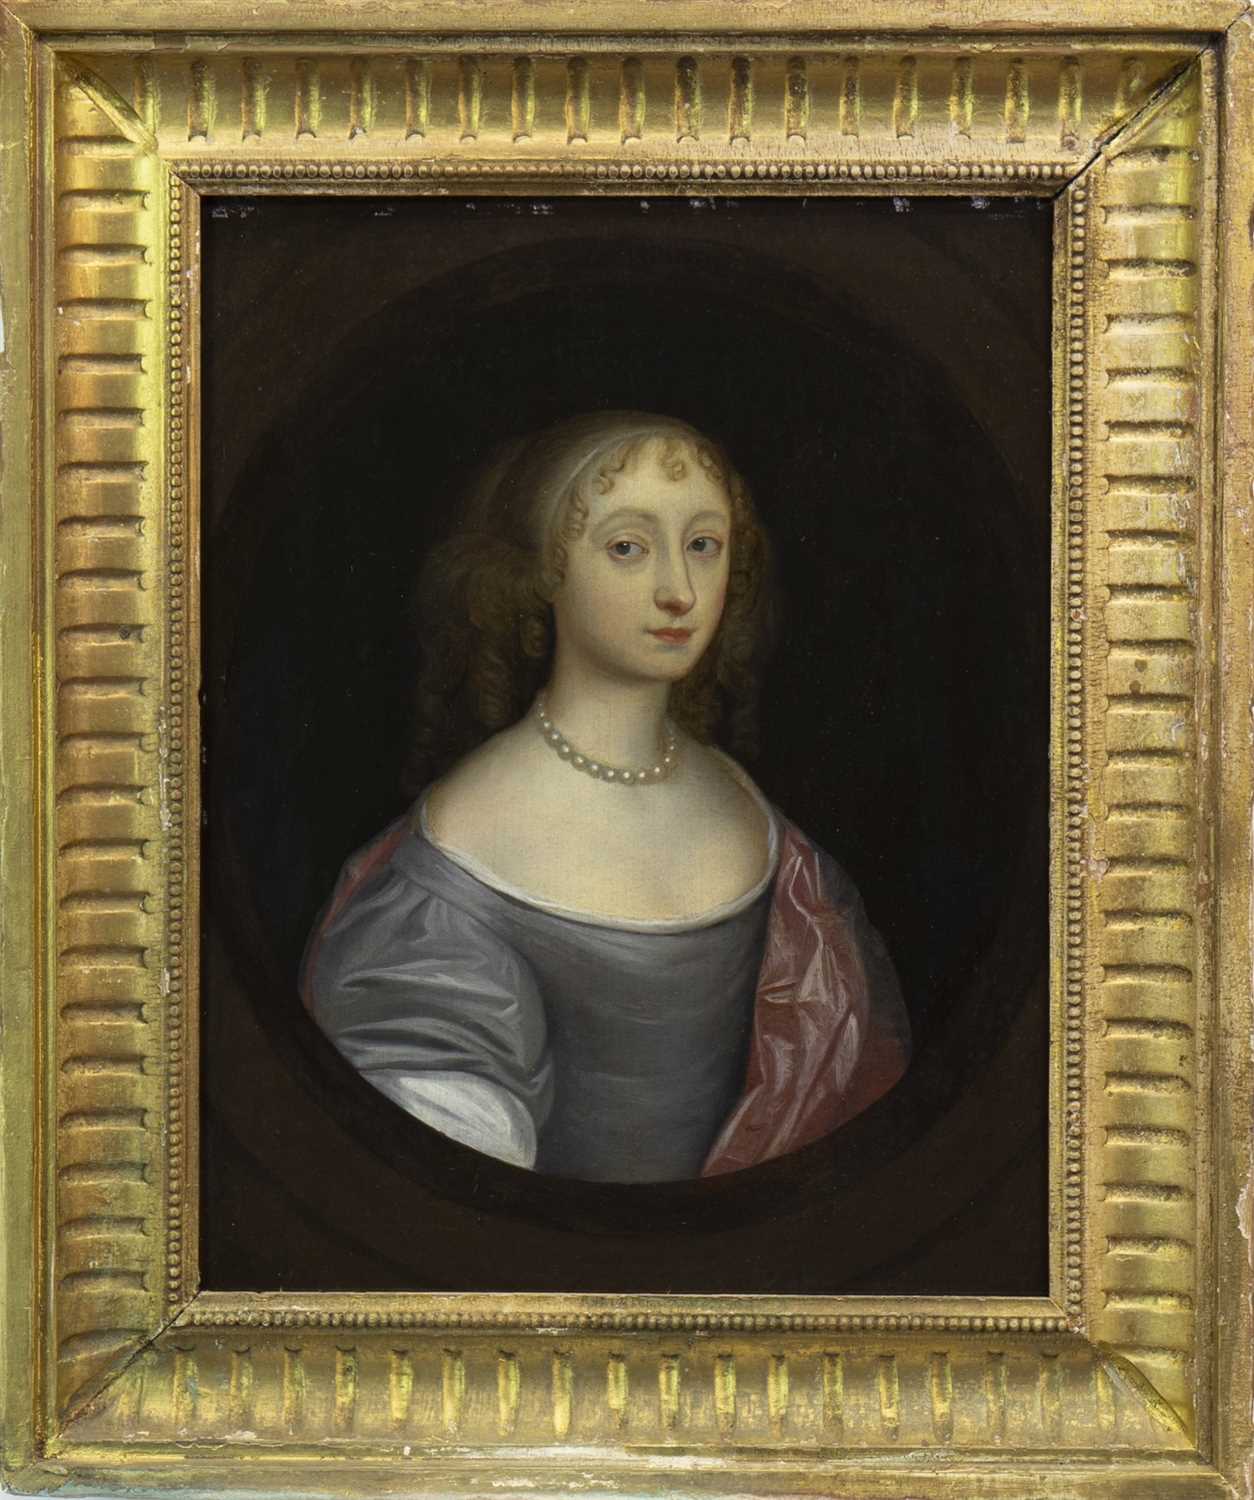 Lot 407 - PORTRAIT OF A YOUNG LADY, AN OIL ON PANEL BY JOHN SCOUGALL